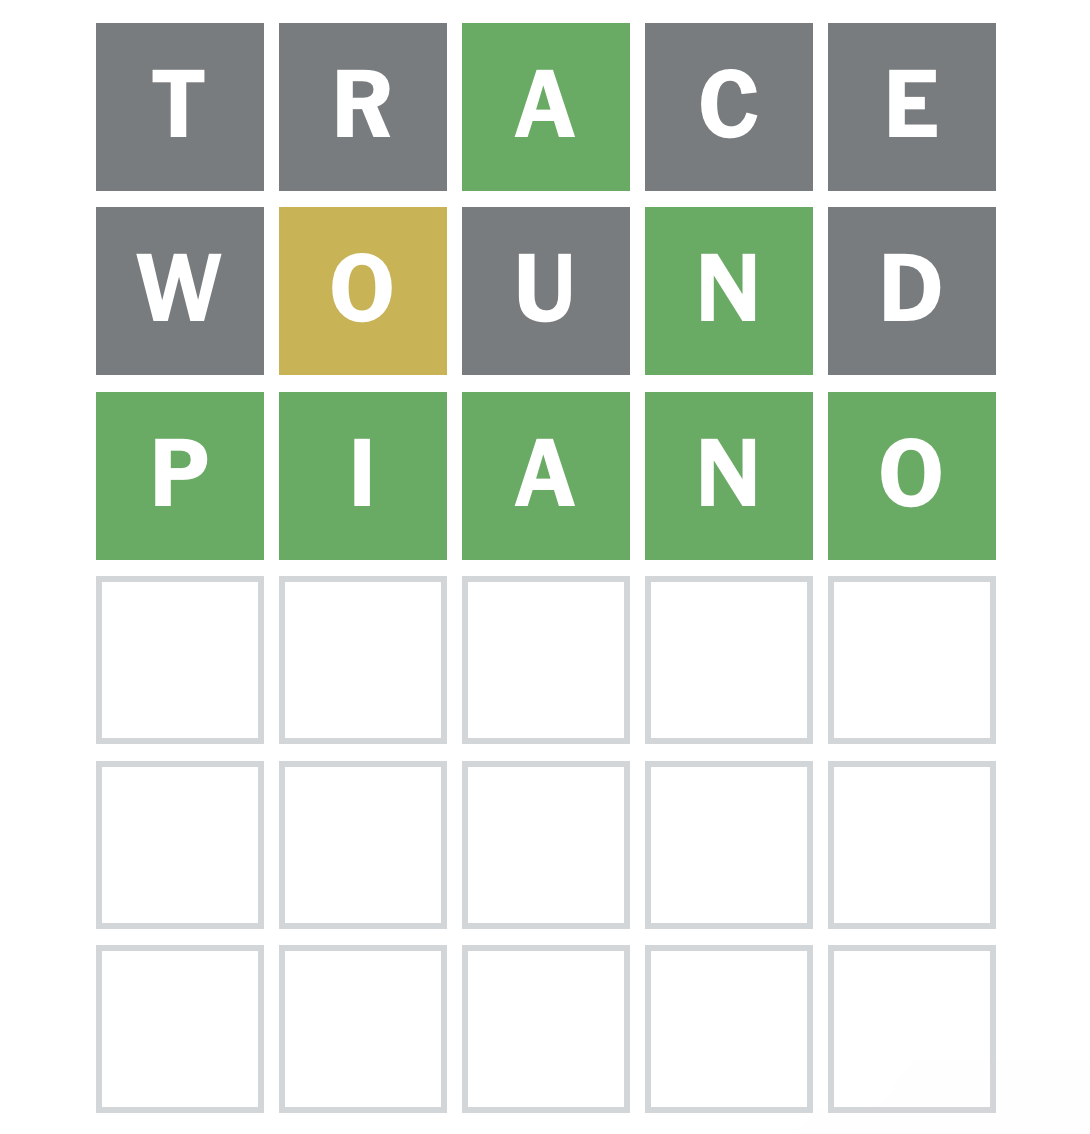 A wordl screenshot with the words: trace, wound, radio